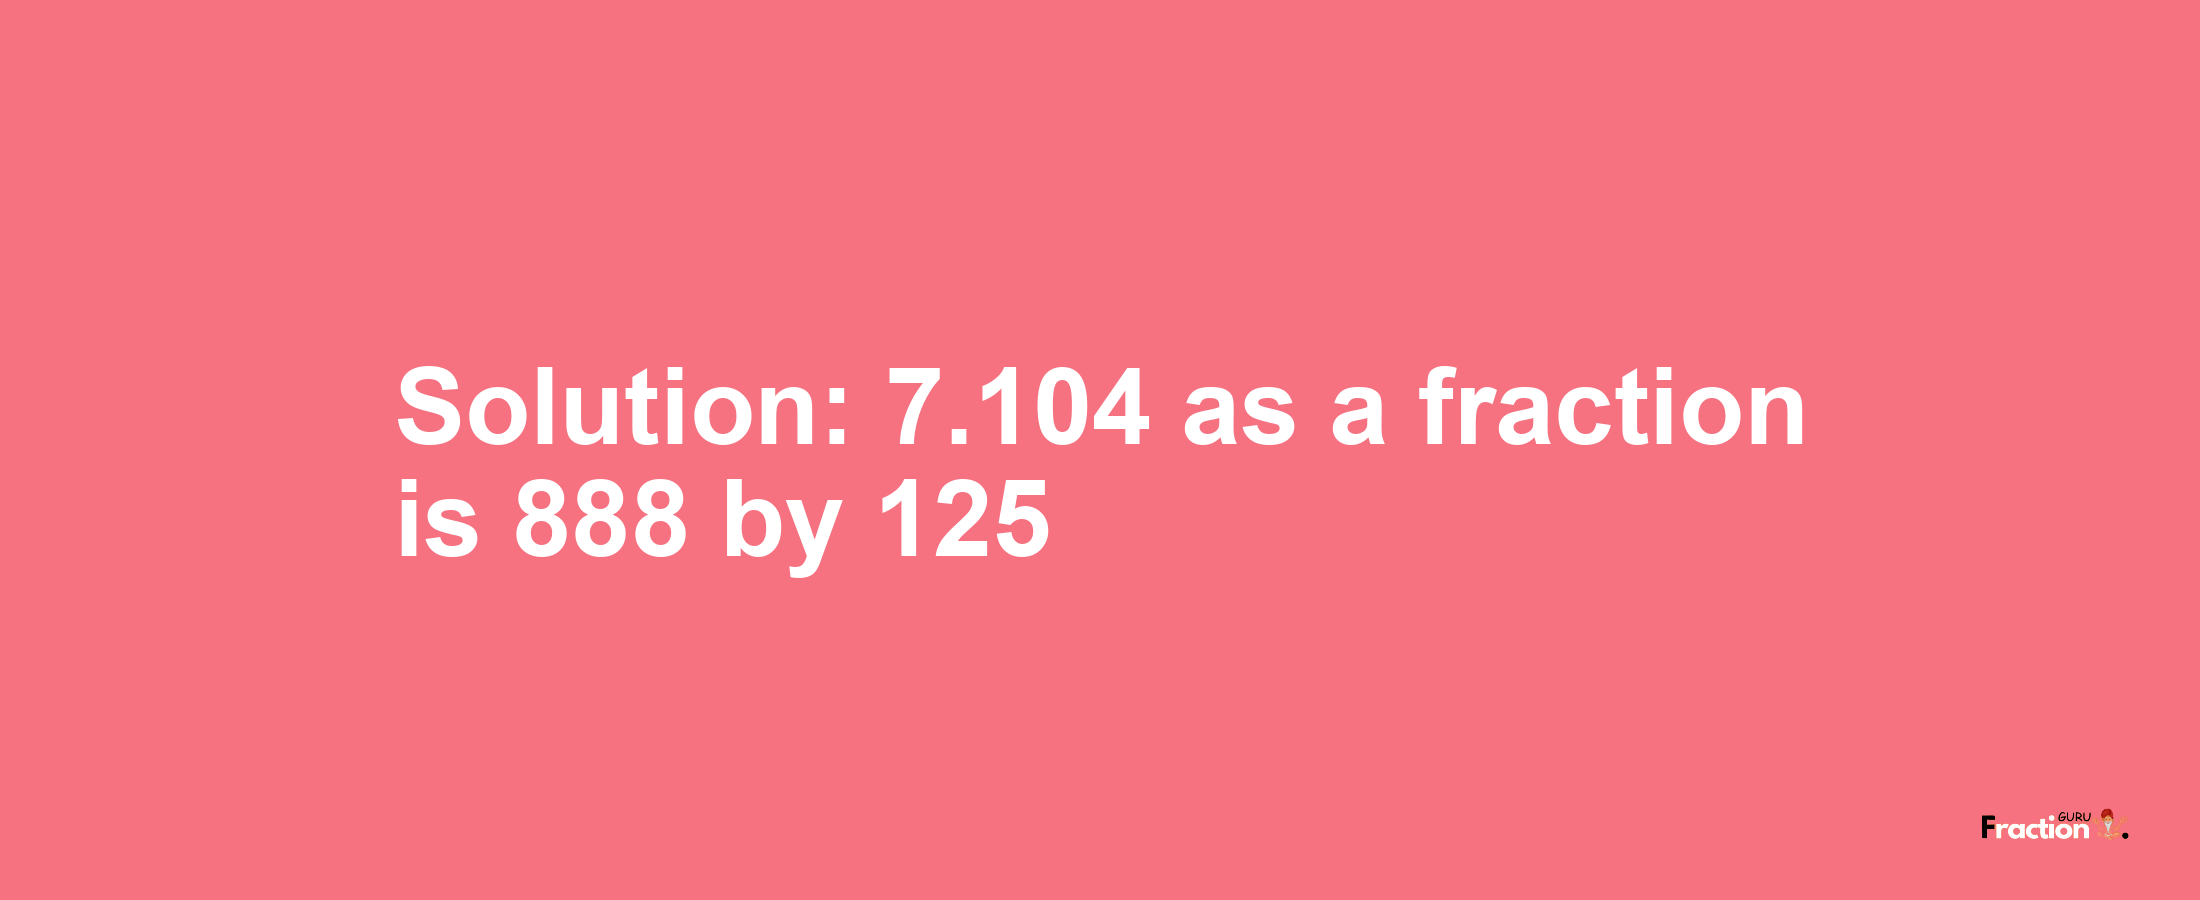 Solution:7.104 as a fraction is 888/125